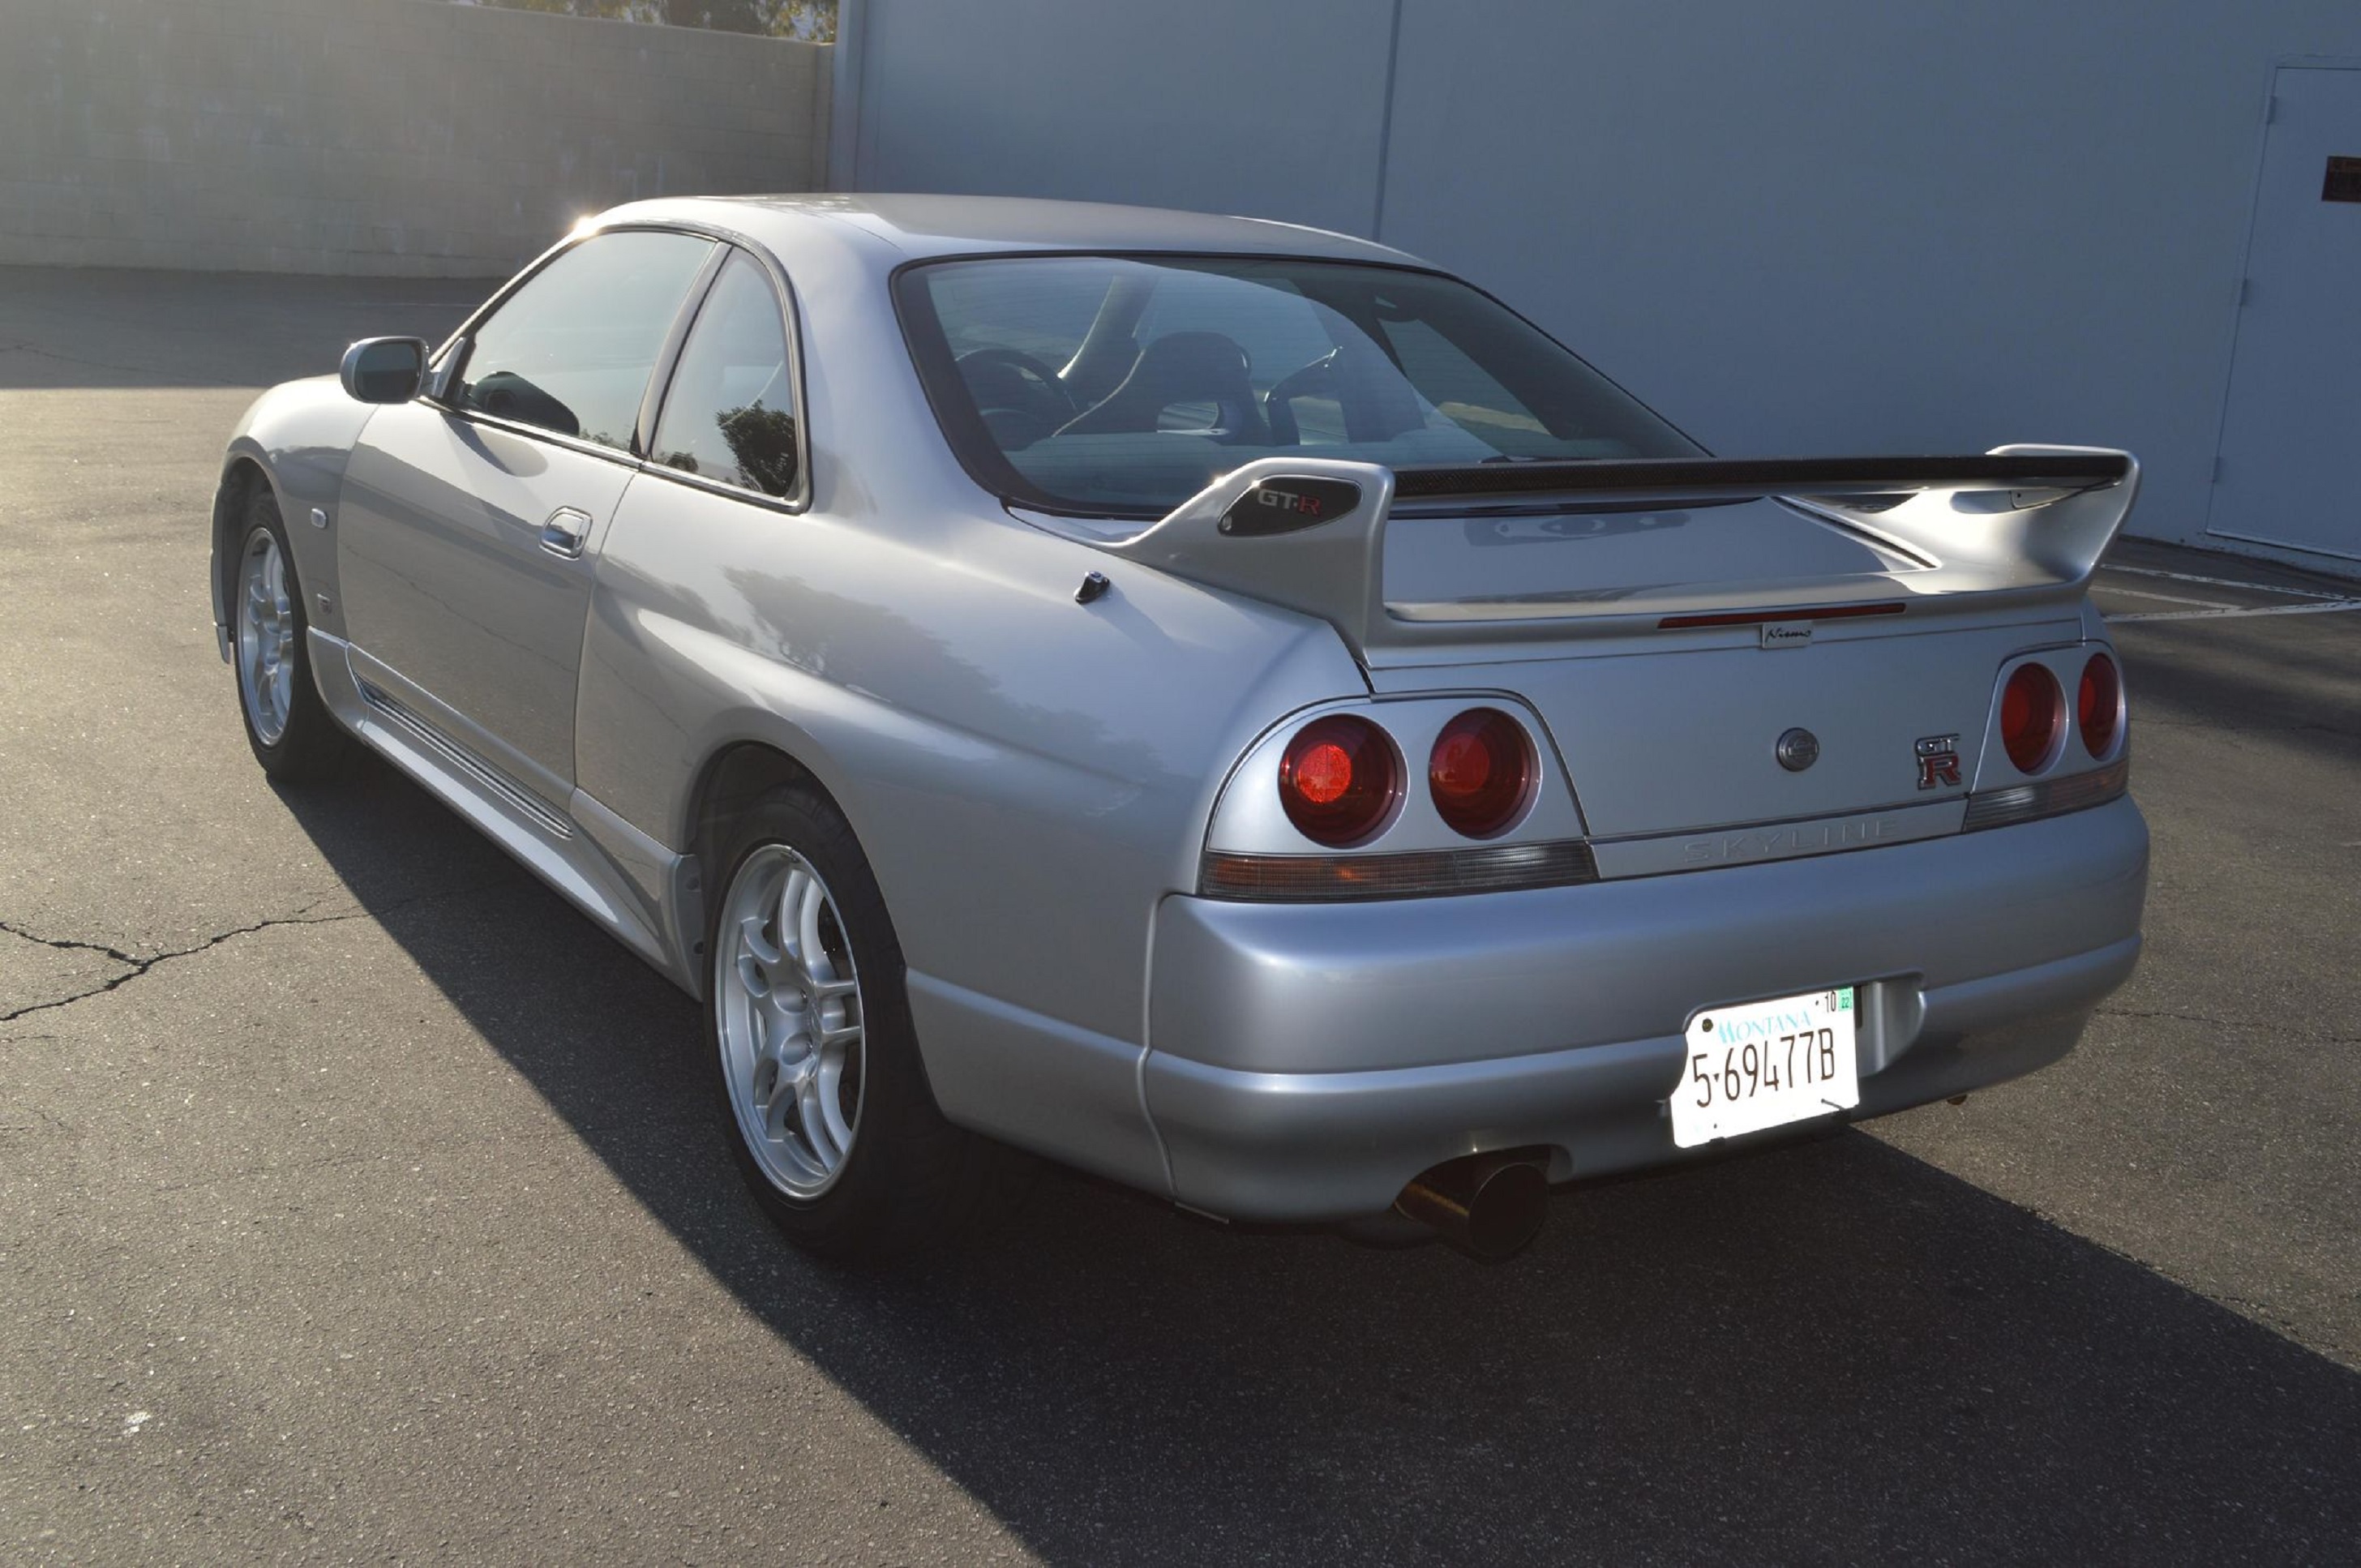 The rear 3/4 view of a silver 1995 Nissan R33 Skyline GT-R in a parking lot